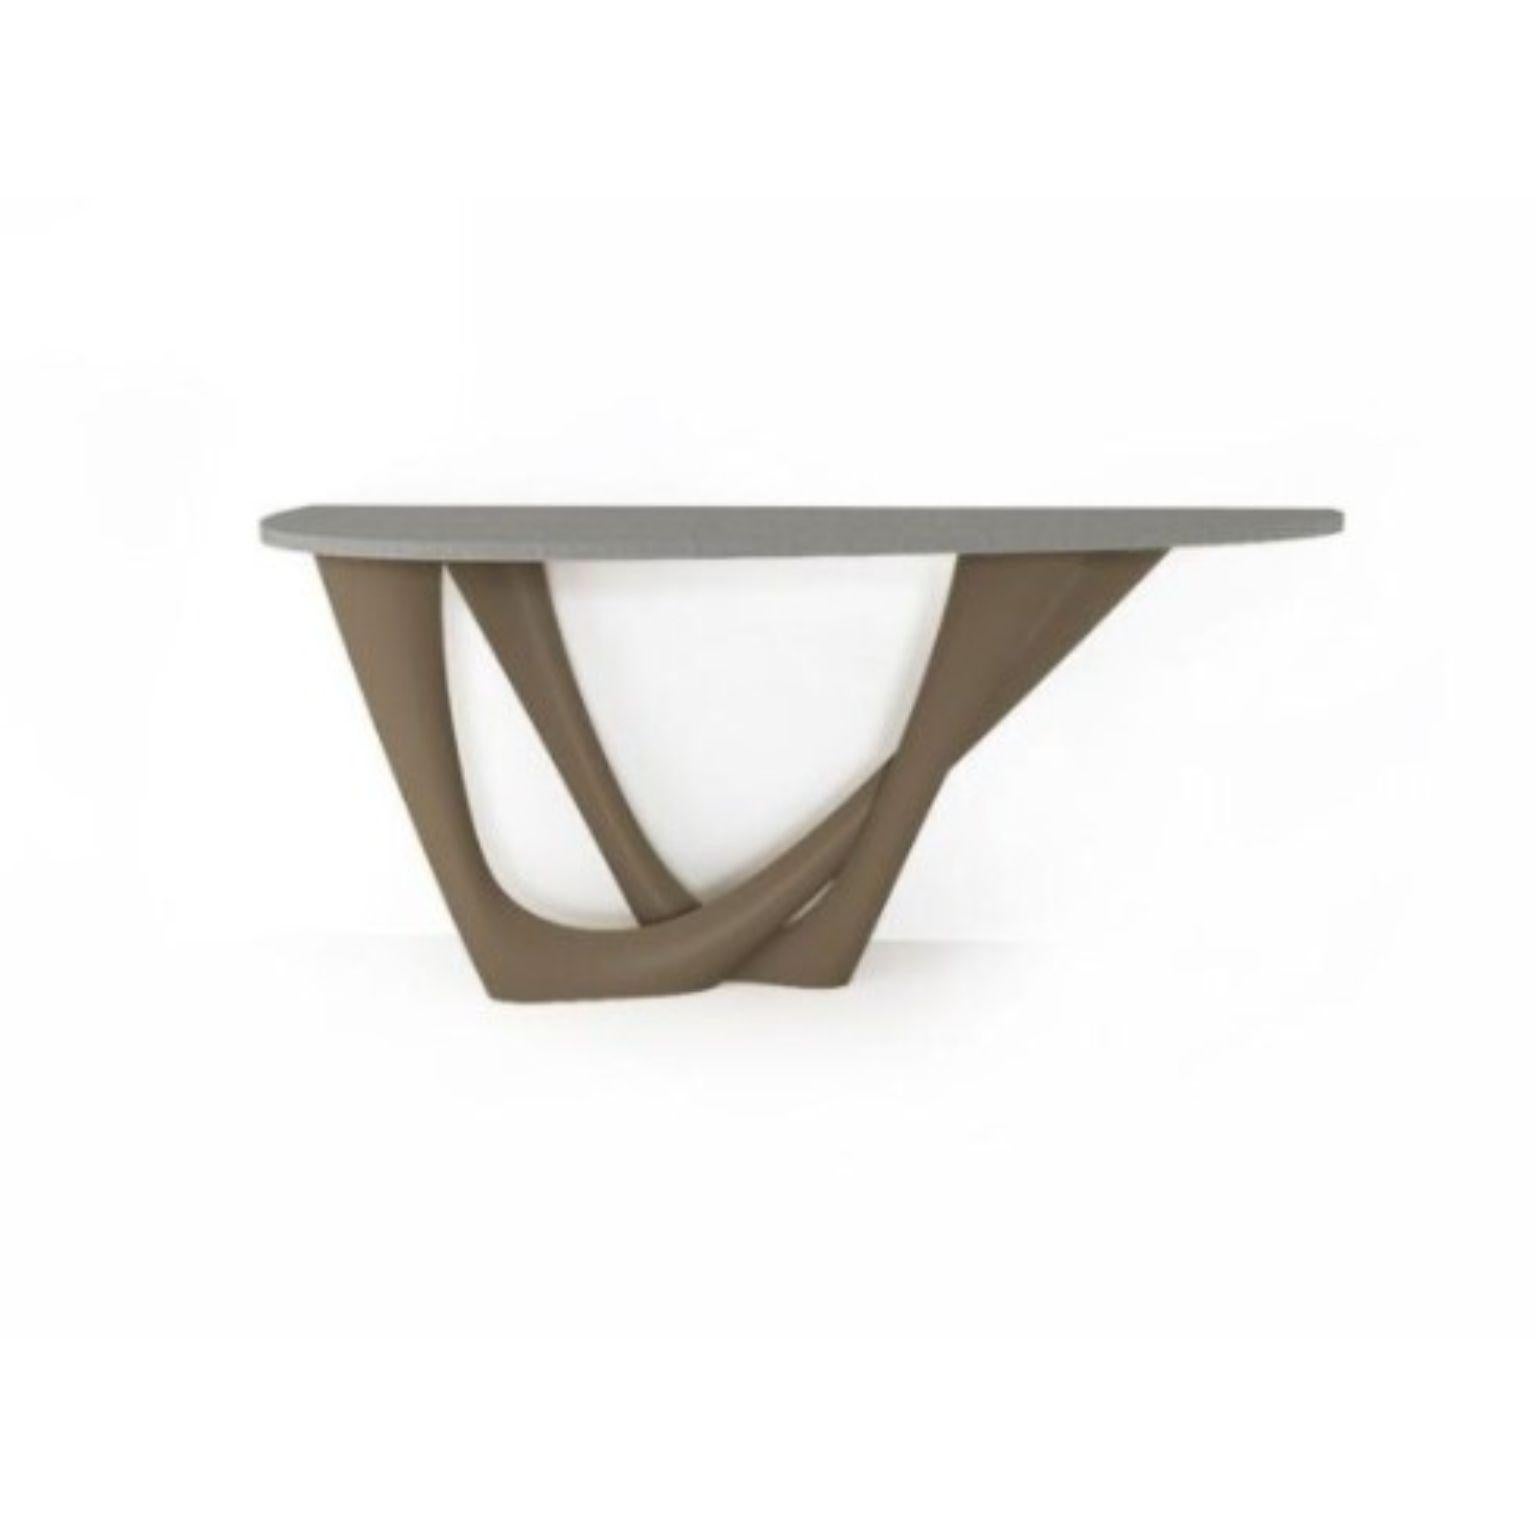 Beige Grey G-Console Duo concrete top and steel base by Zieta
Dimensions: D 56 x W 168 x H 75 cm 
Material: Carbon steel, concrete.
Also available in different colors and dimensions.

G-Console is another bionic object in our collection. Created for